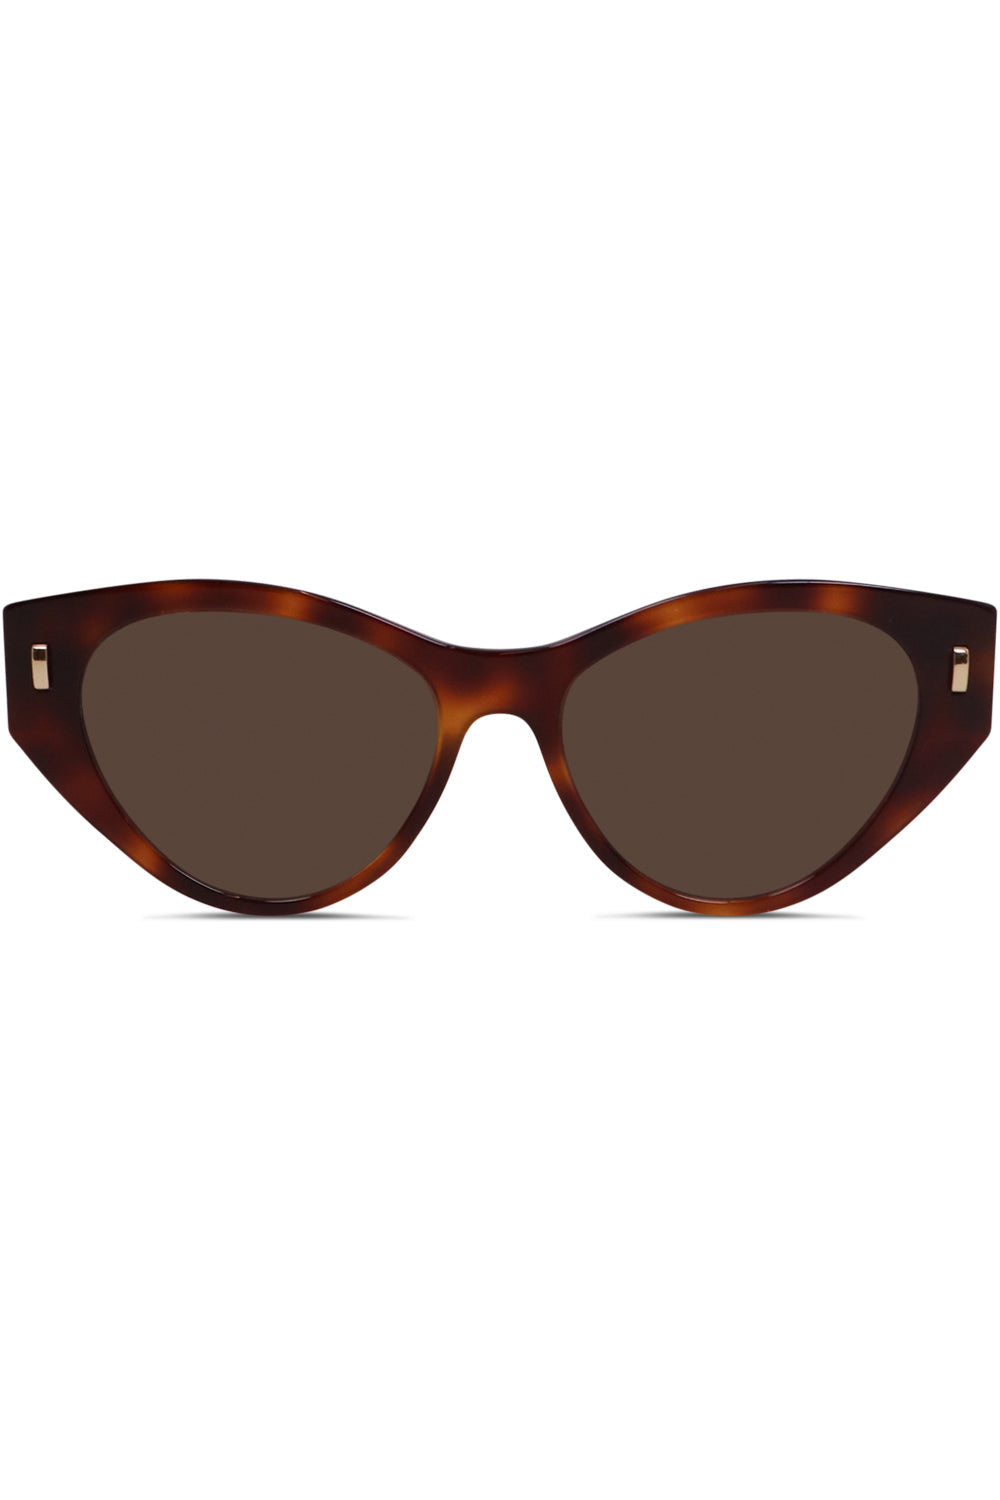 Sunglasses Fendi Brown in Not specified - 26541145